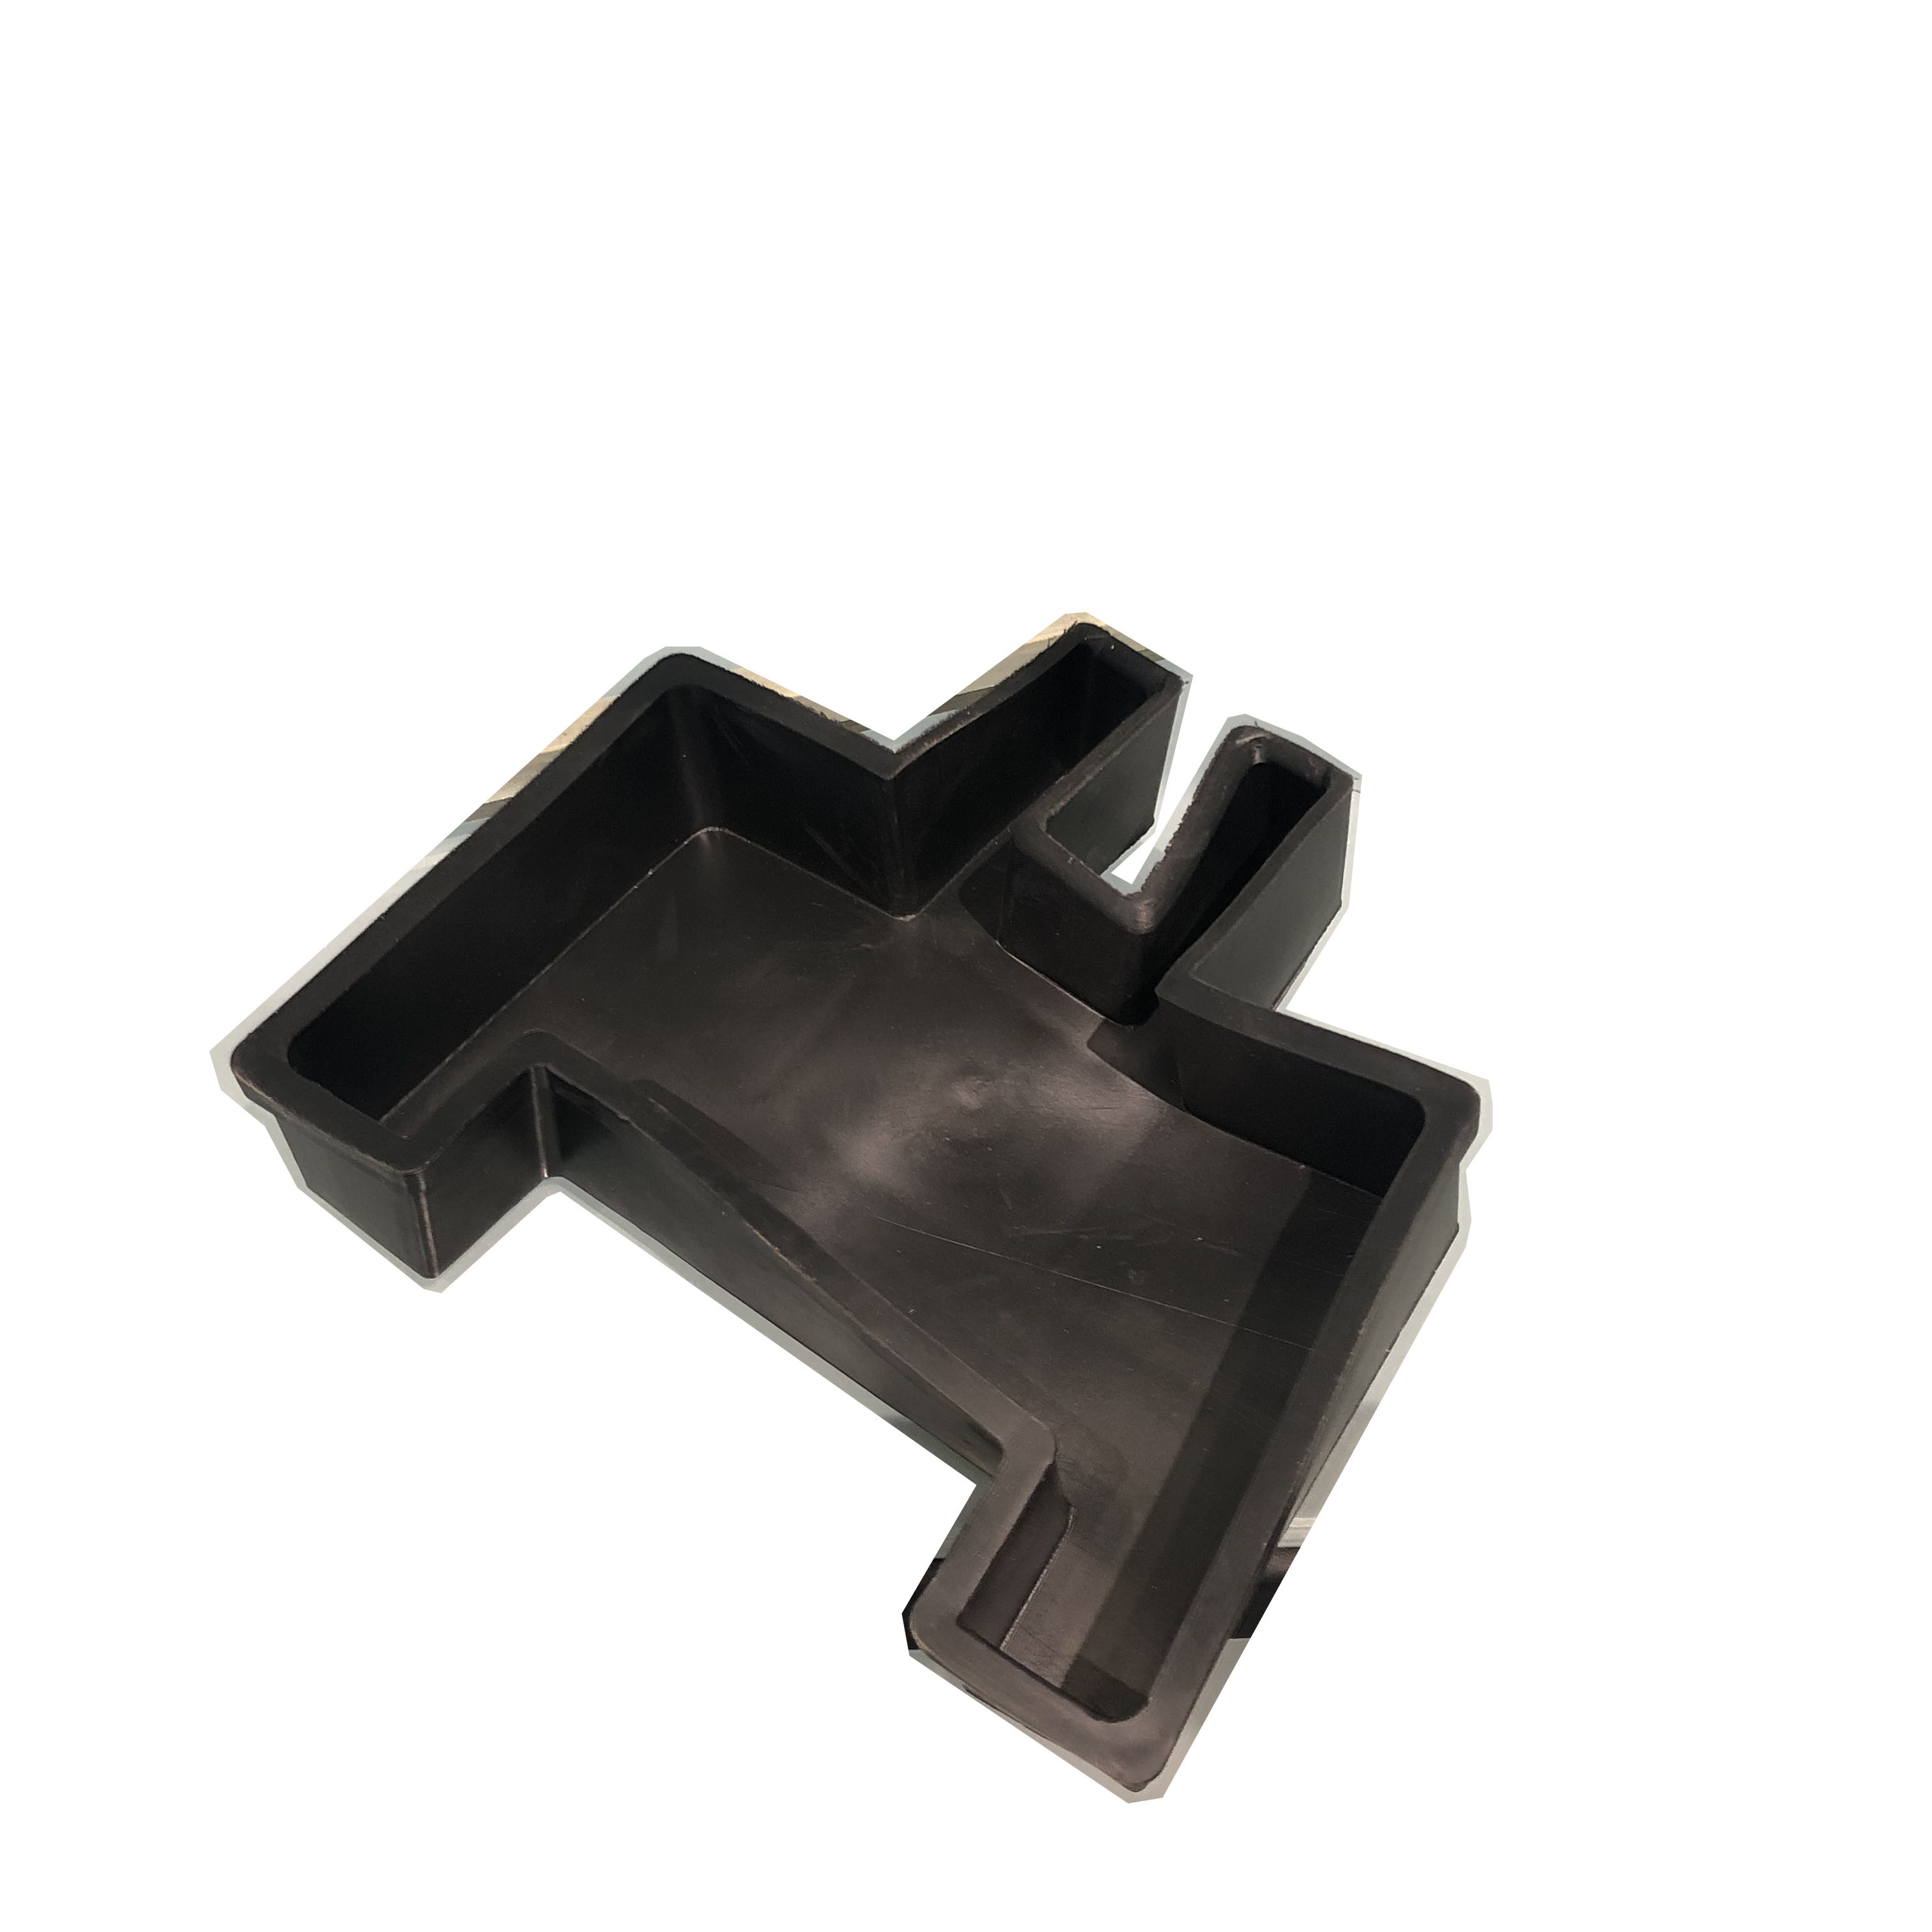 Black Protective Case Plastic Moulded Parts For Equipment Components